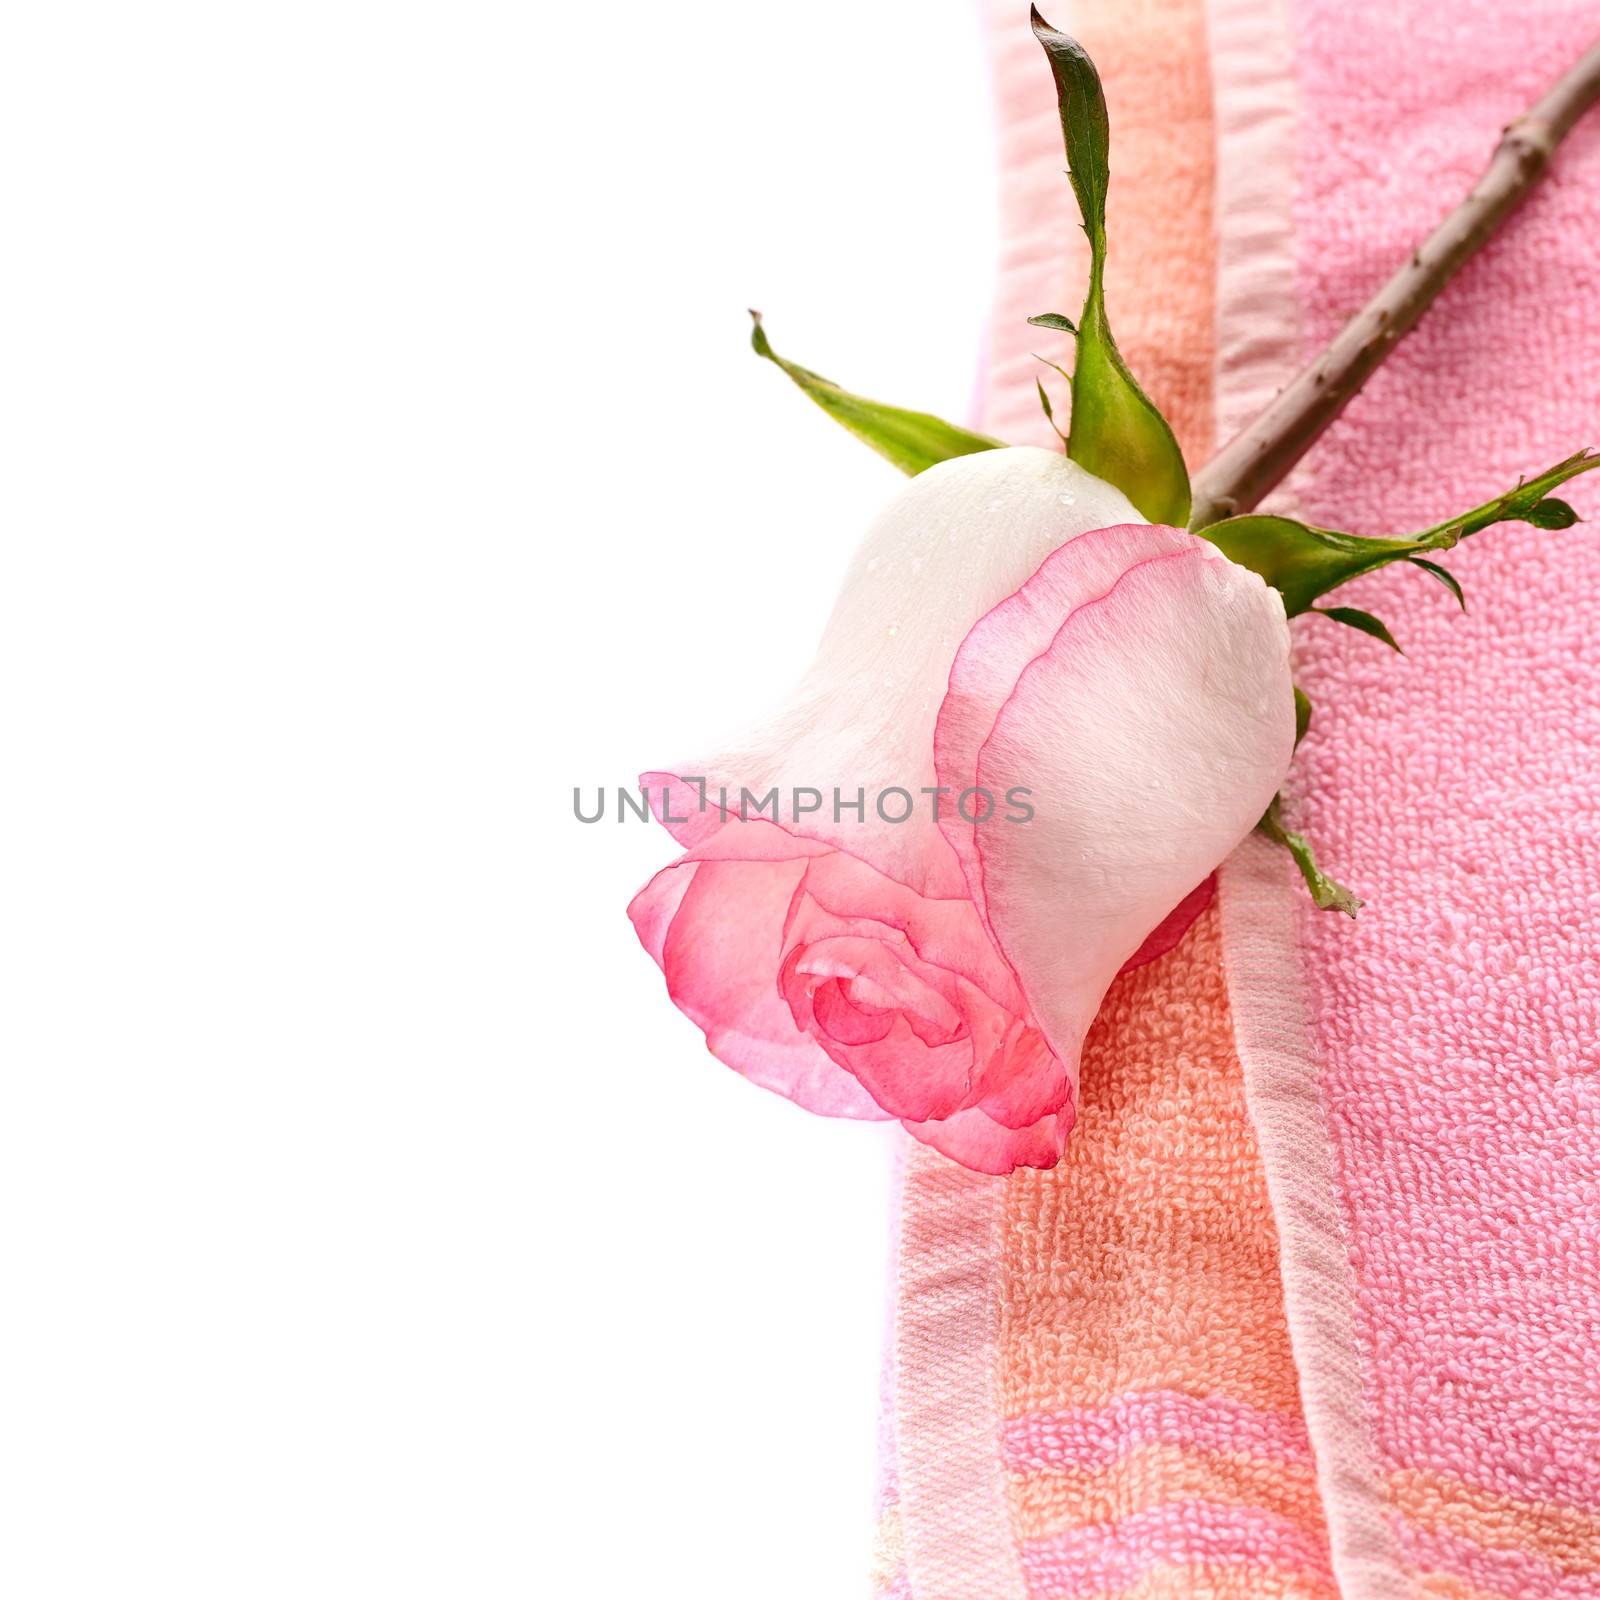 Pink rose and towel. Flower on a towel. Soft towel and pink flower.